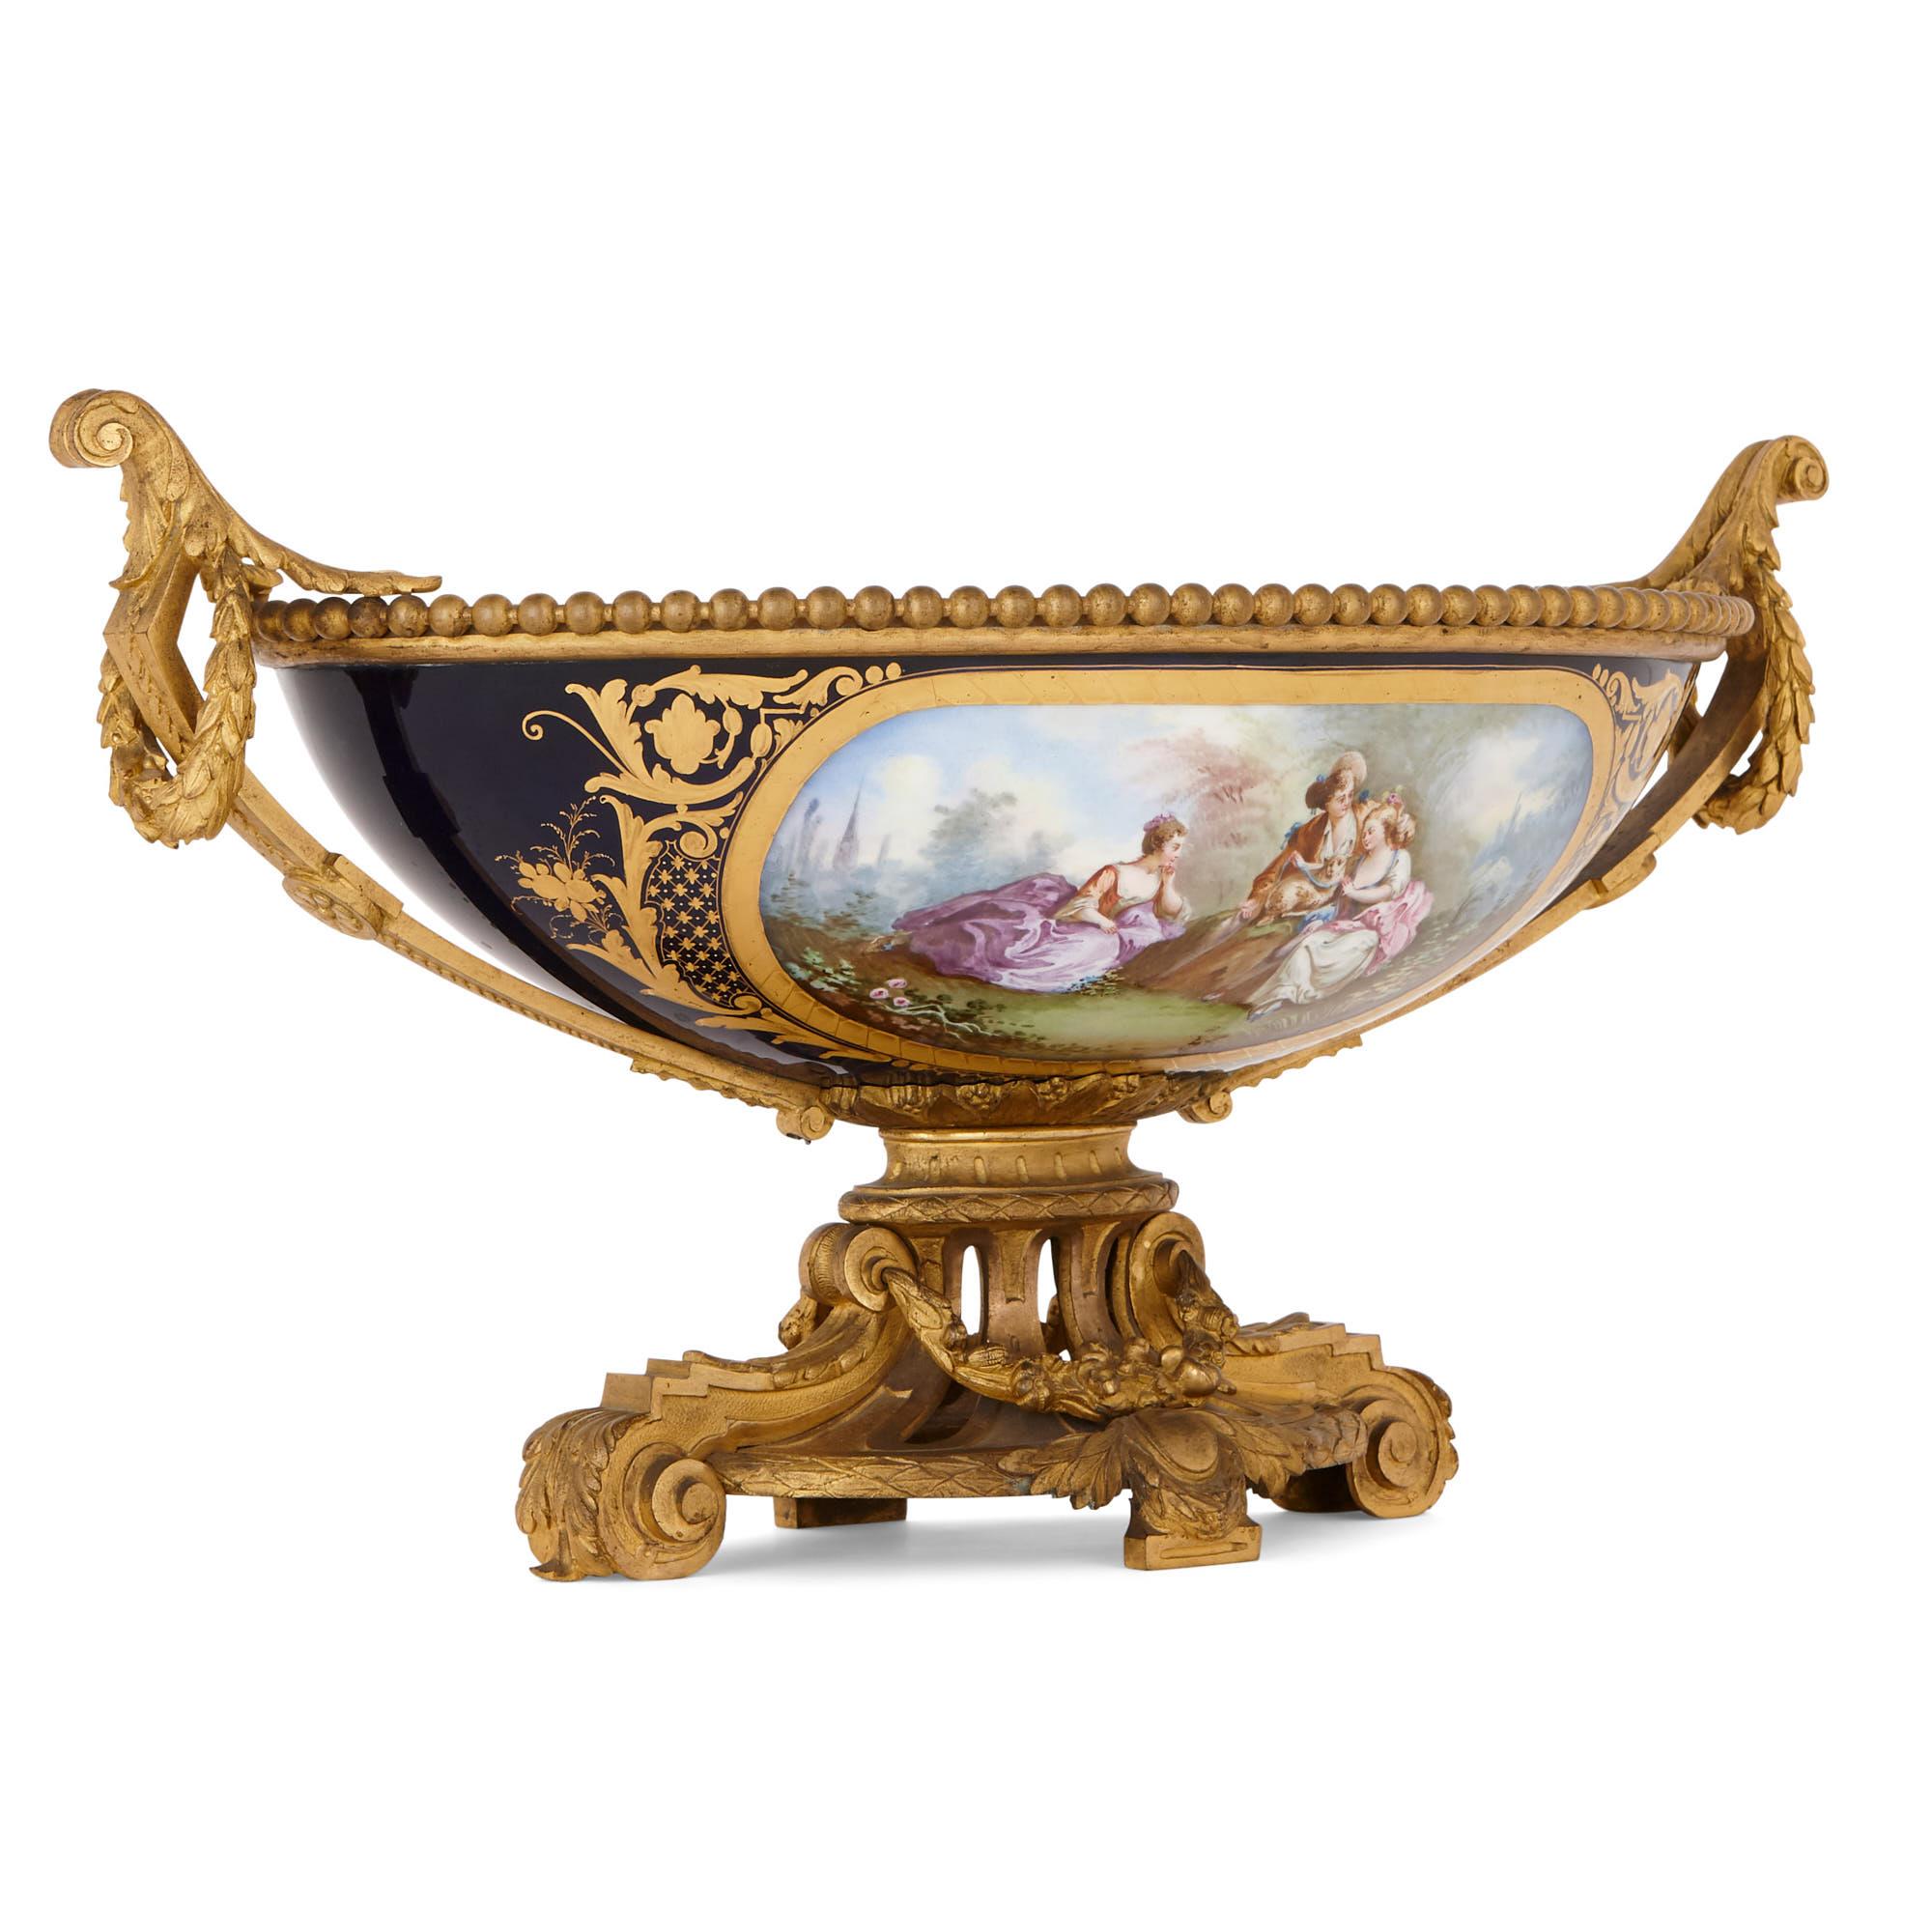 This stunning centrepiece bowl was created in France in the late 19th century. It is fashioned after 18th-Century wares, produced by the prestigious Sèvres Porcelain Manufactory. Typical of such items, this centrepiece is designed in an elegant